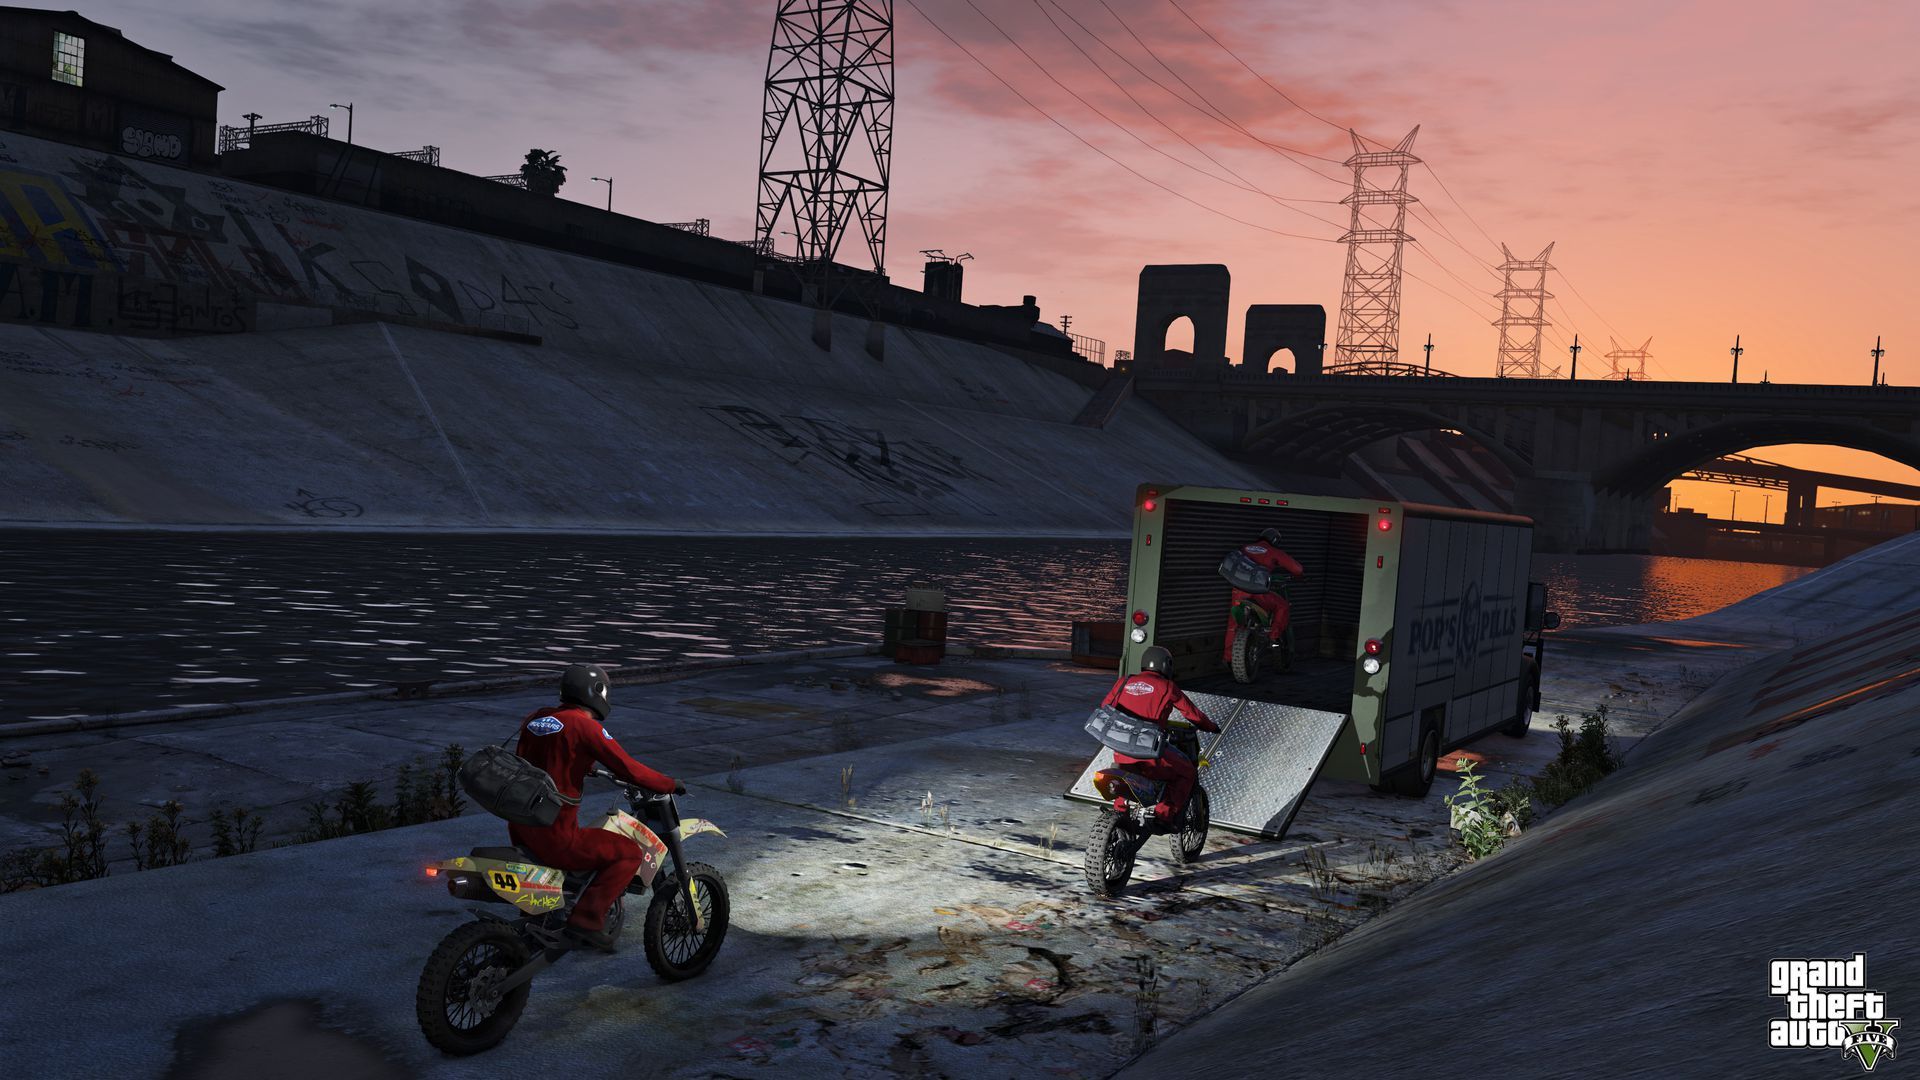 Screenshot of the current non-enhanced version of "Grand Theft Auto V."